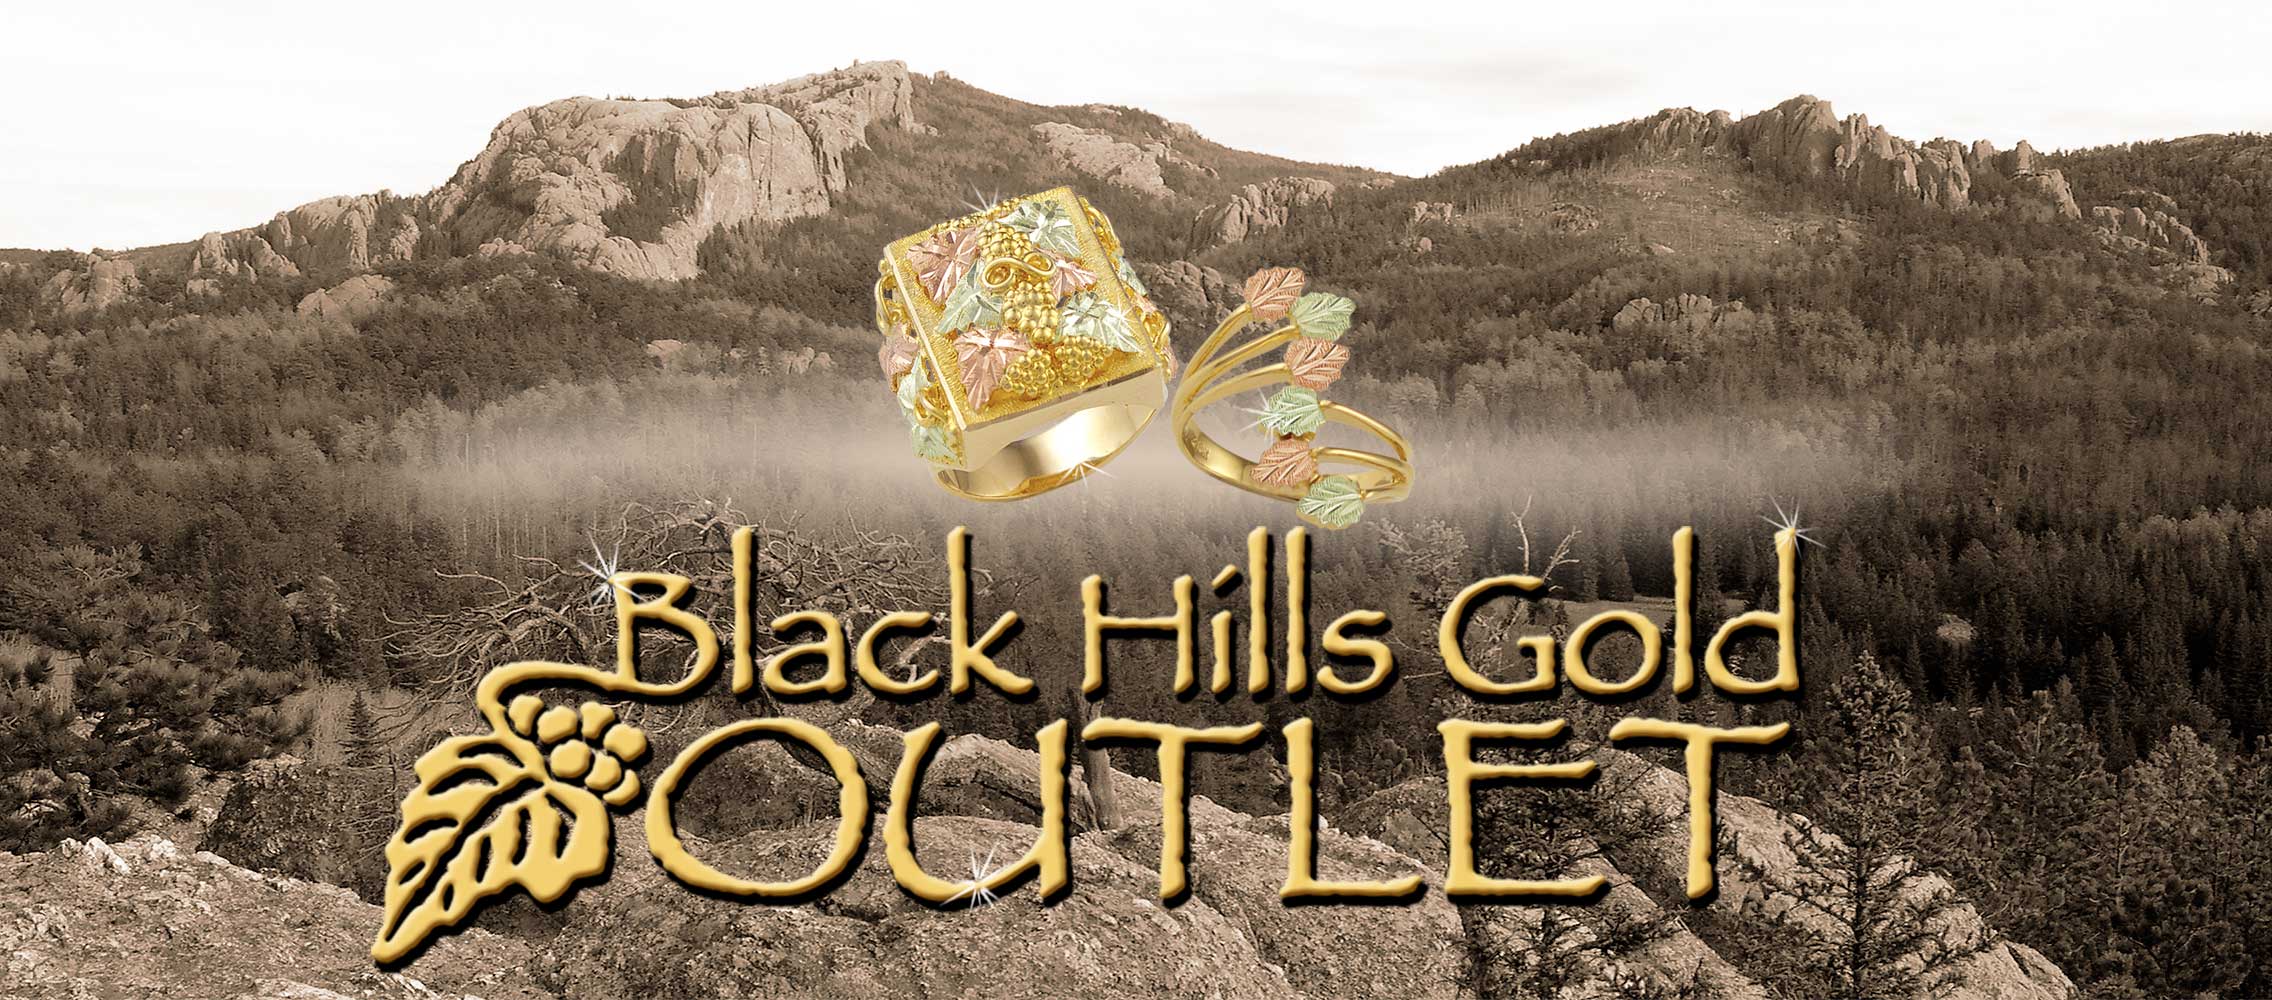 Black Hills Gold Outlet - Specializing in Black Hills Gold Jewelry